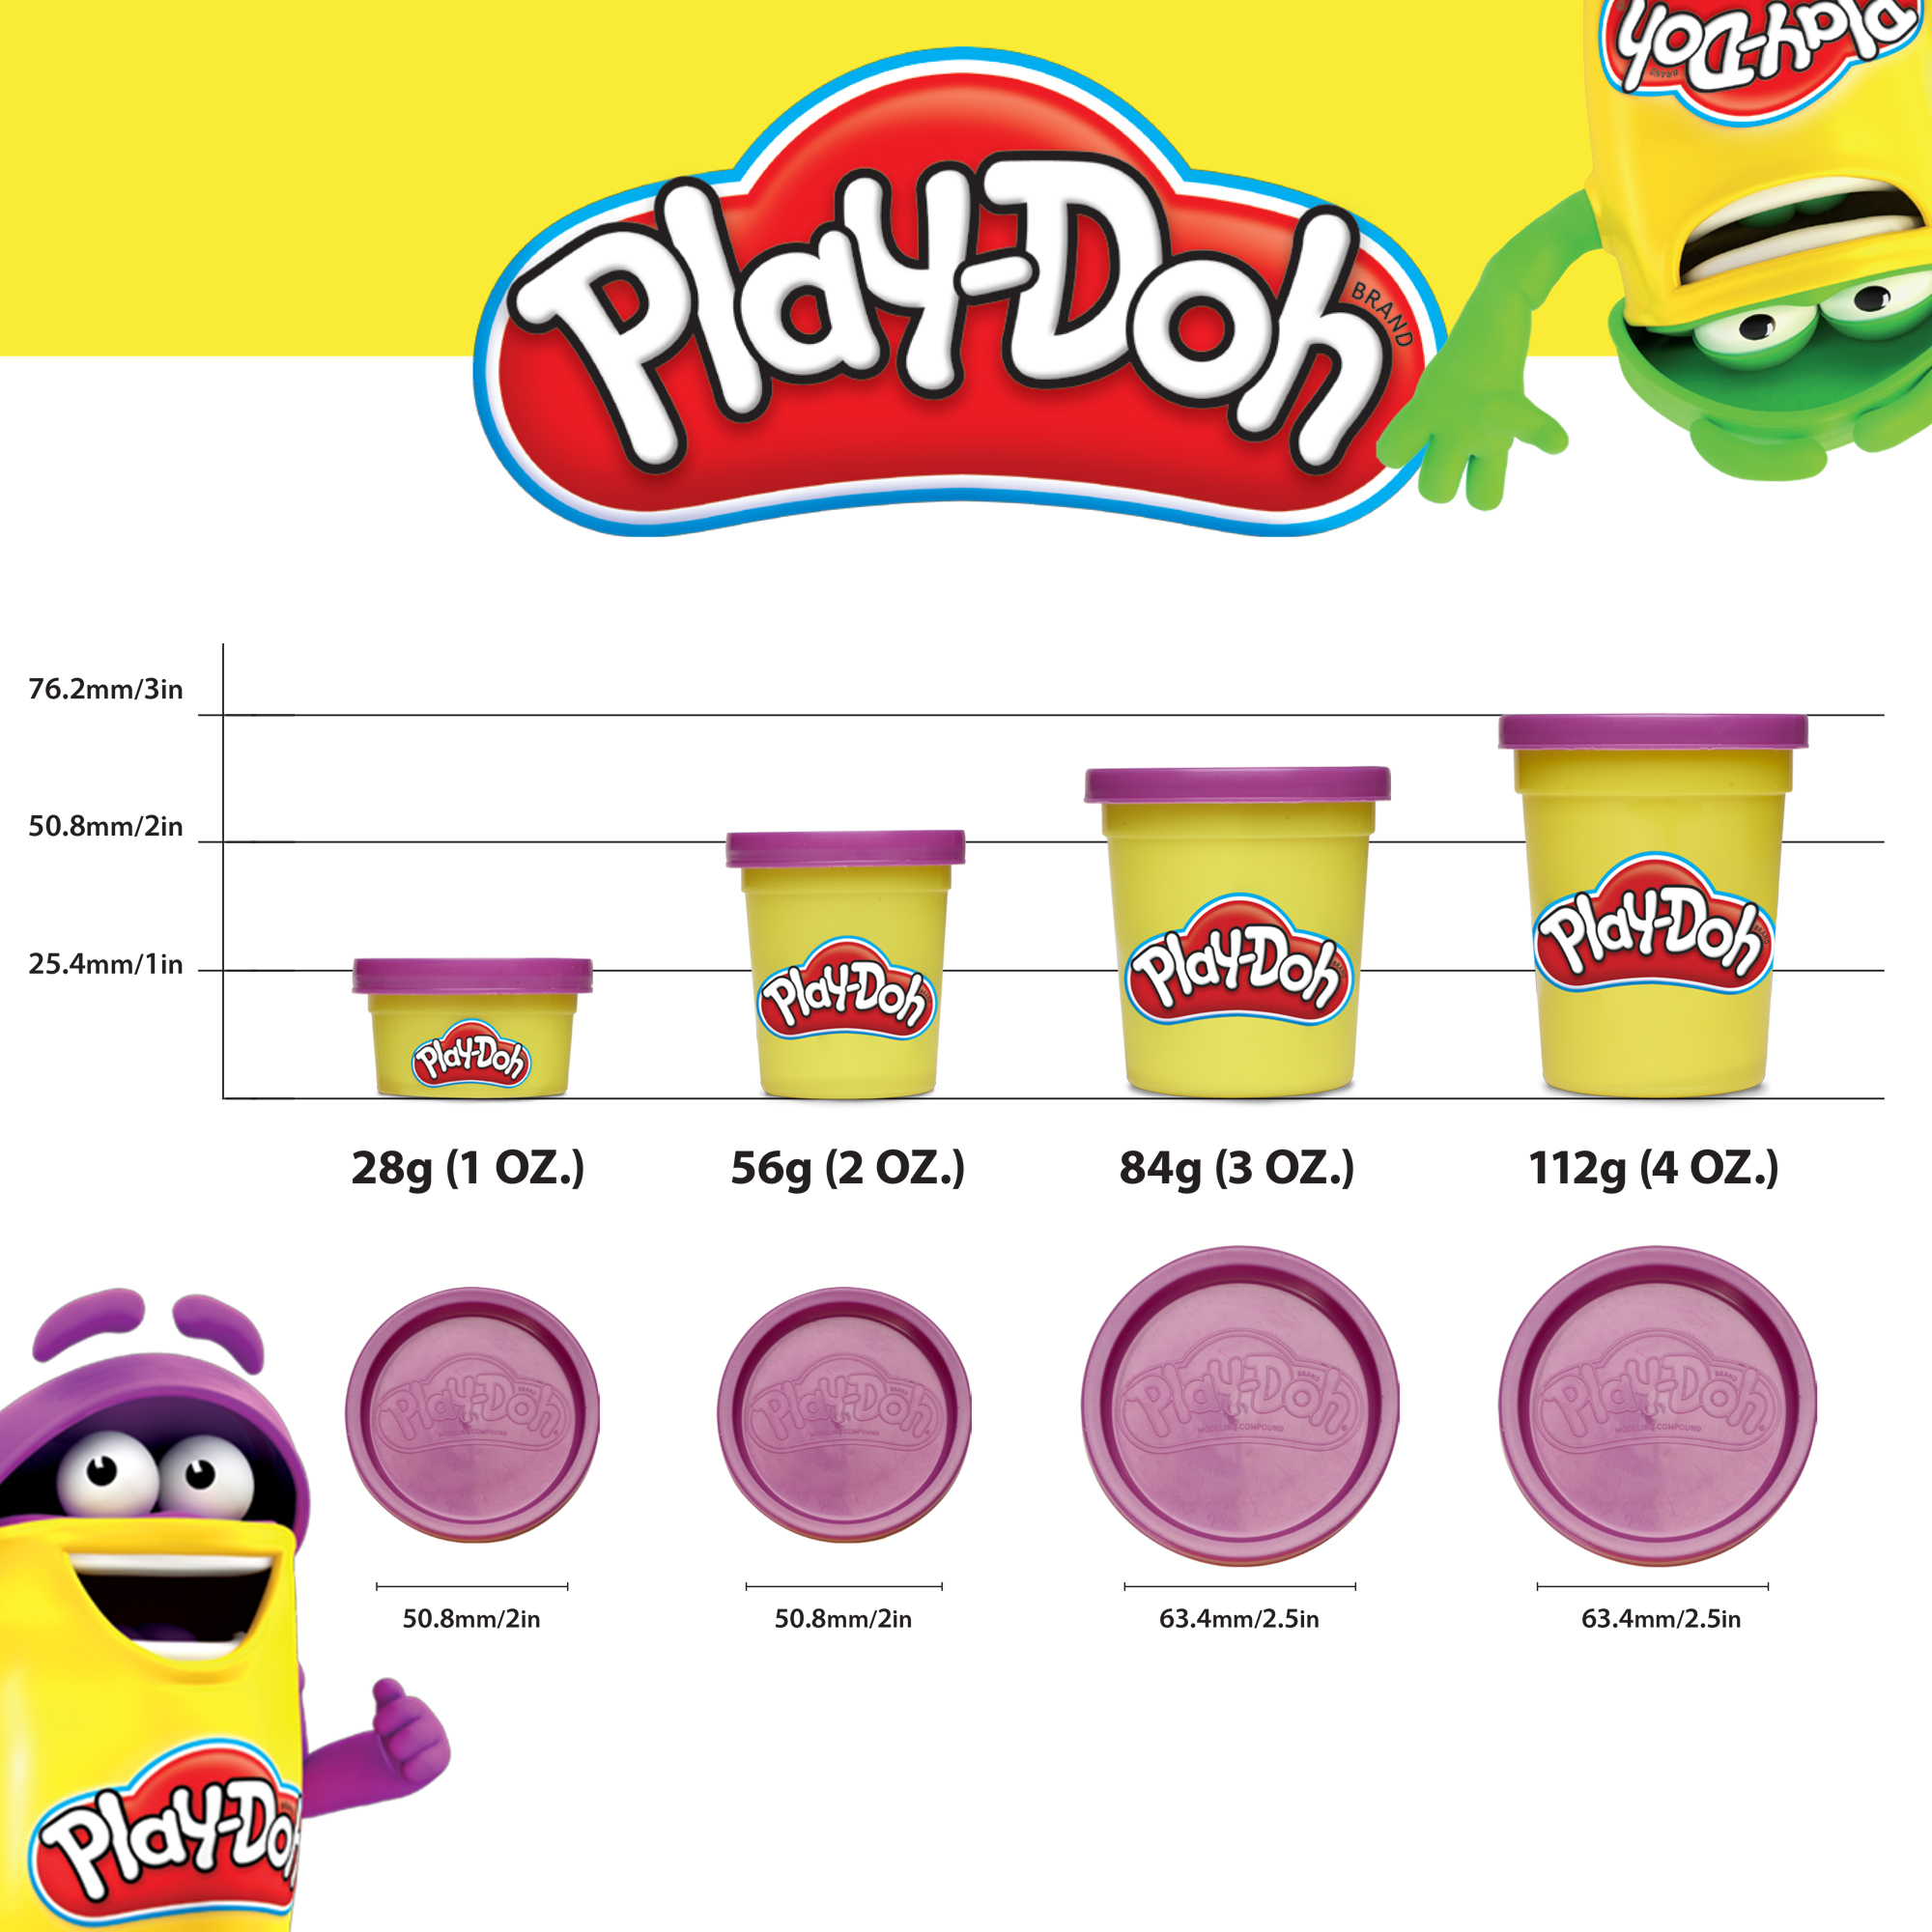 Play-Doh Rainbow Colors 8 Pack of 2-Ounce Cans, Back to School Supplies - image 5 of 7